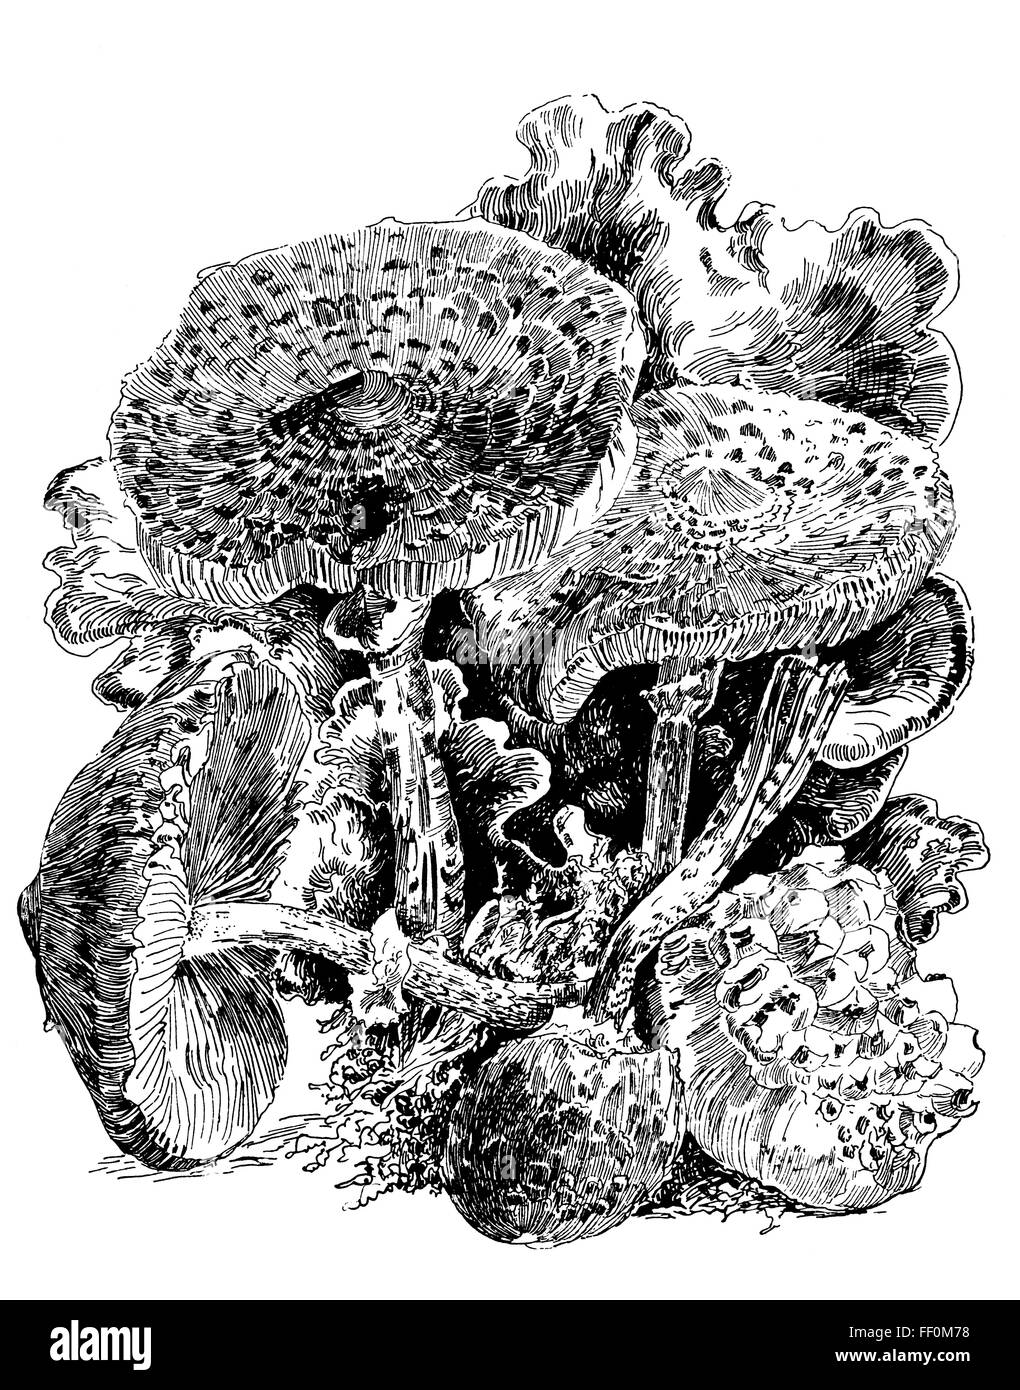 1897 pen and ink study of fungi, by Guy Halliday from Oakham, line Illustration from 1897 The Studio Magazine competition Stock Photo